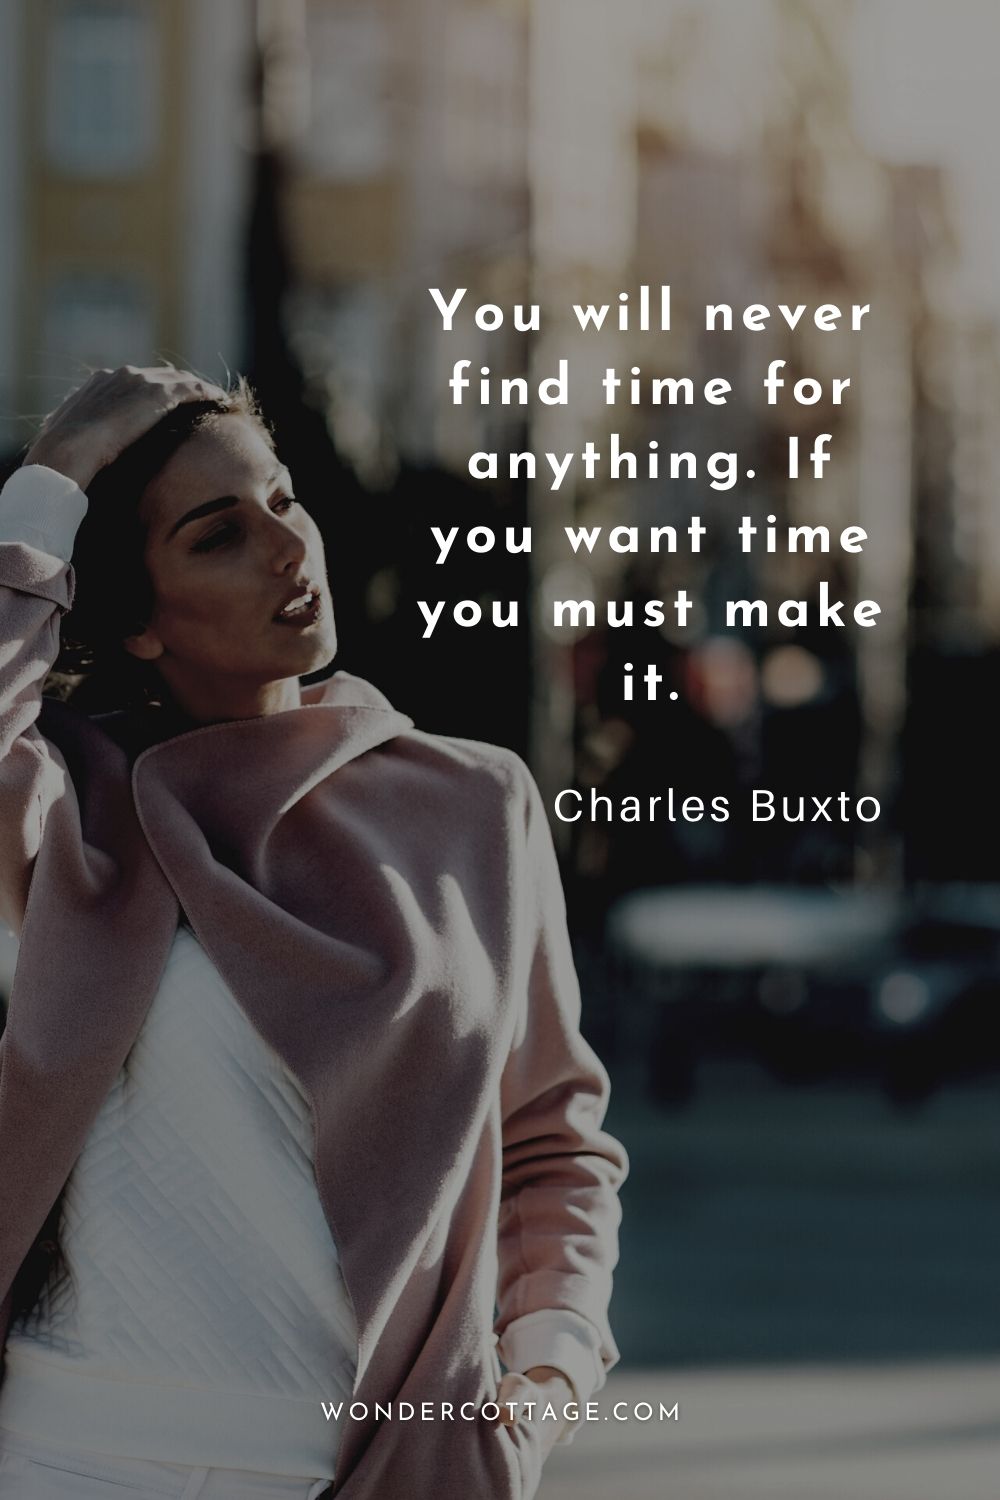 You will never find time for anything. If you want time you must make it.  Charles Buxto